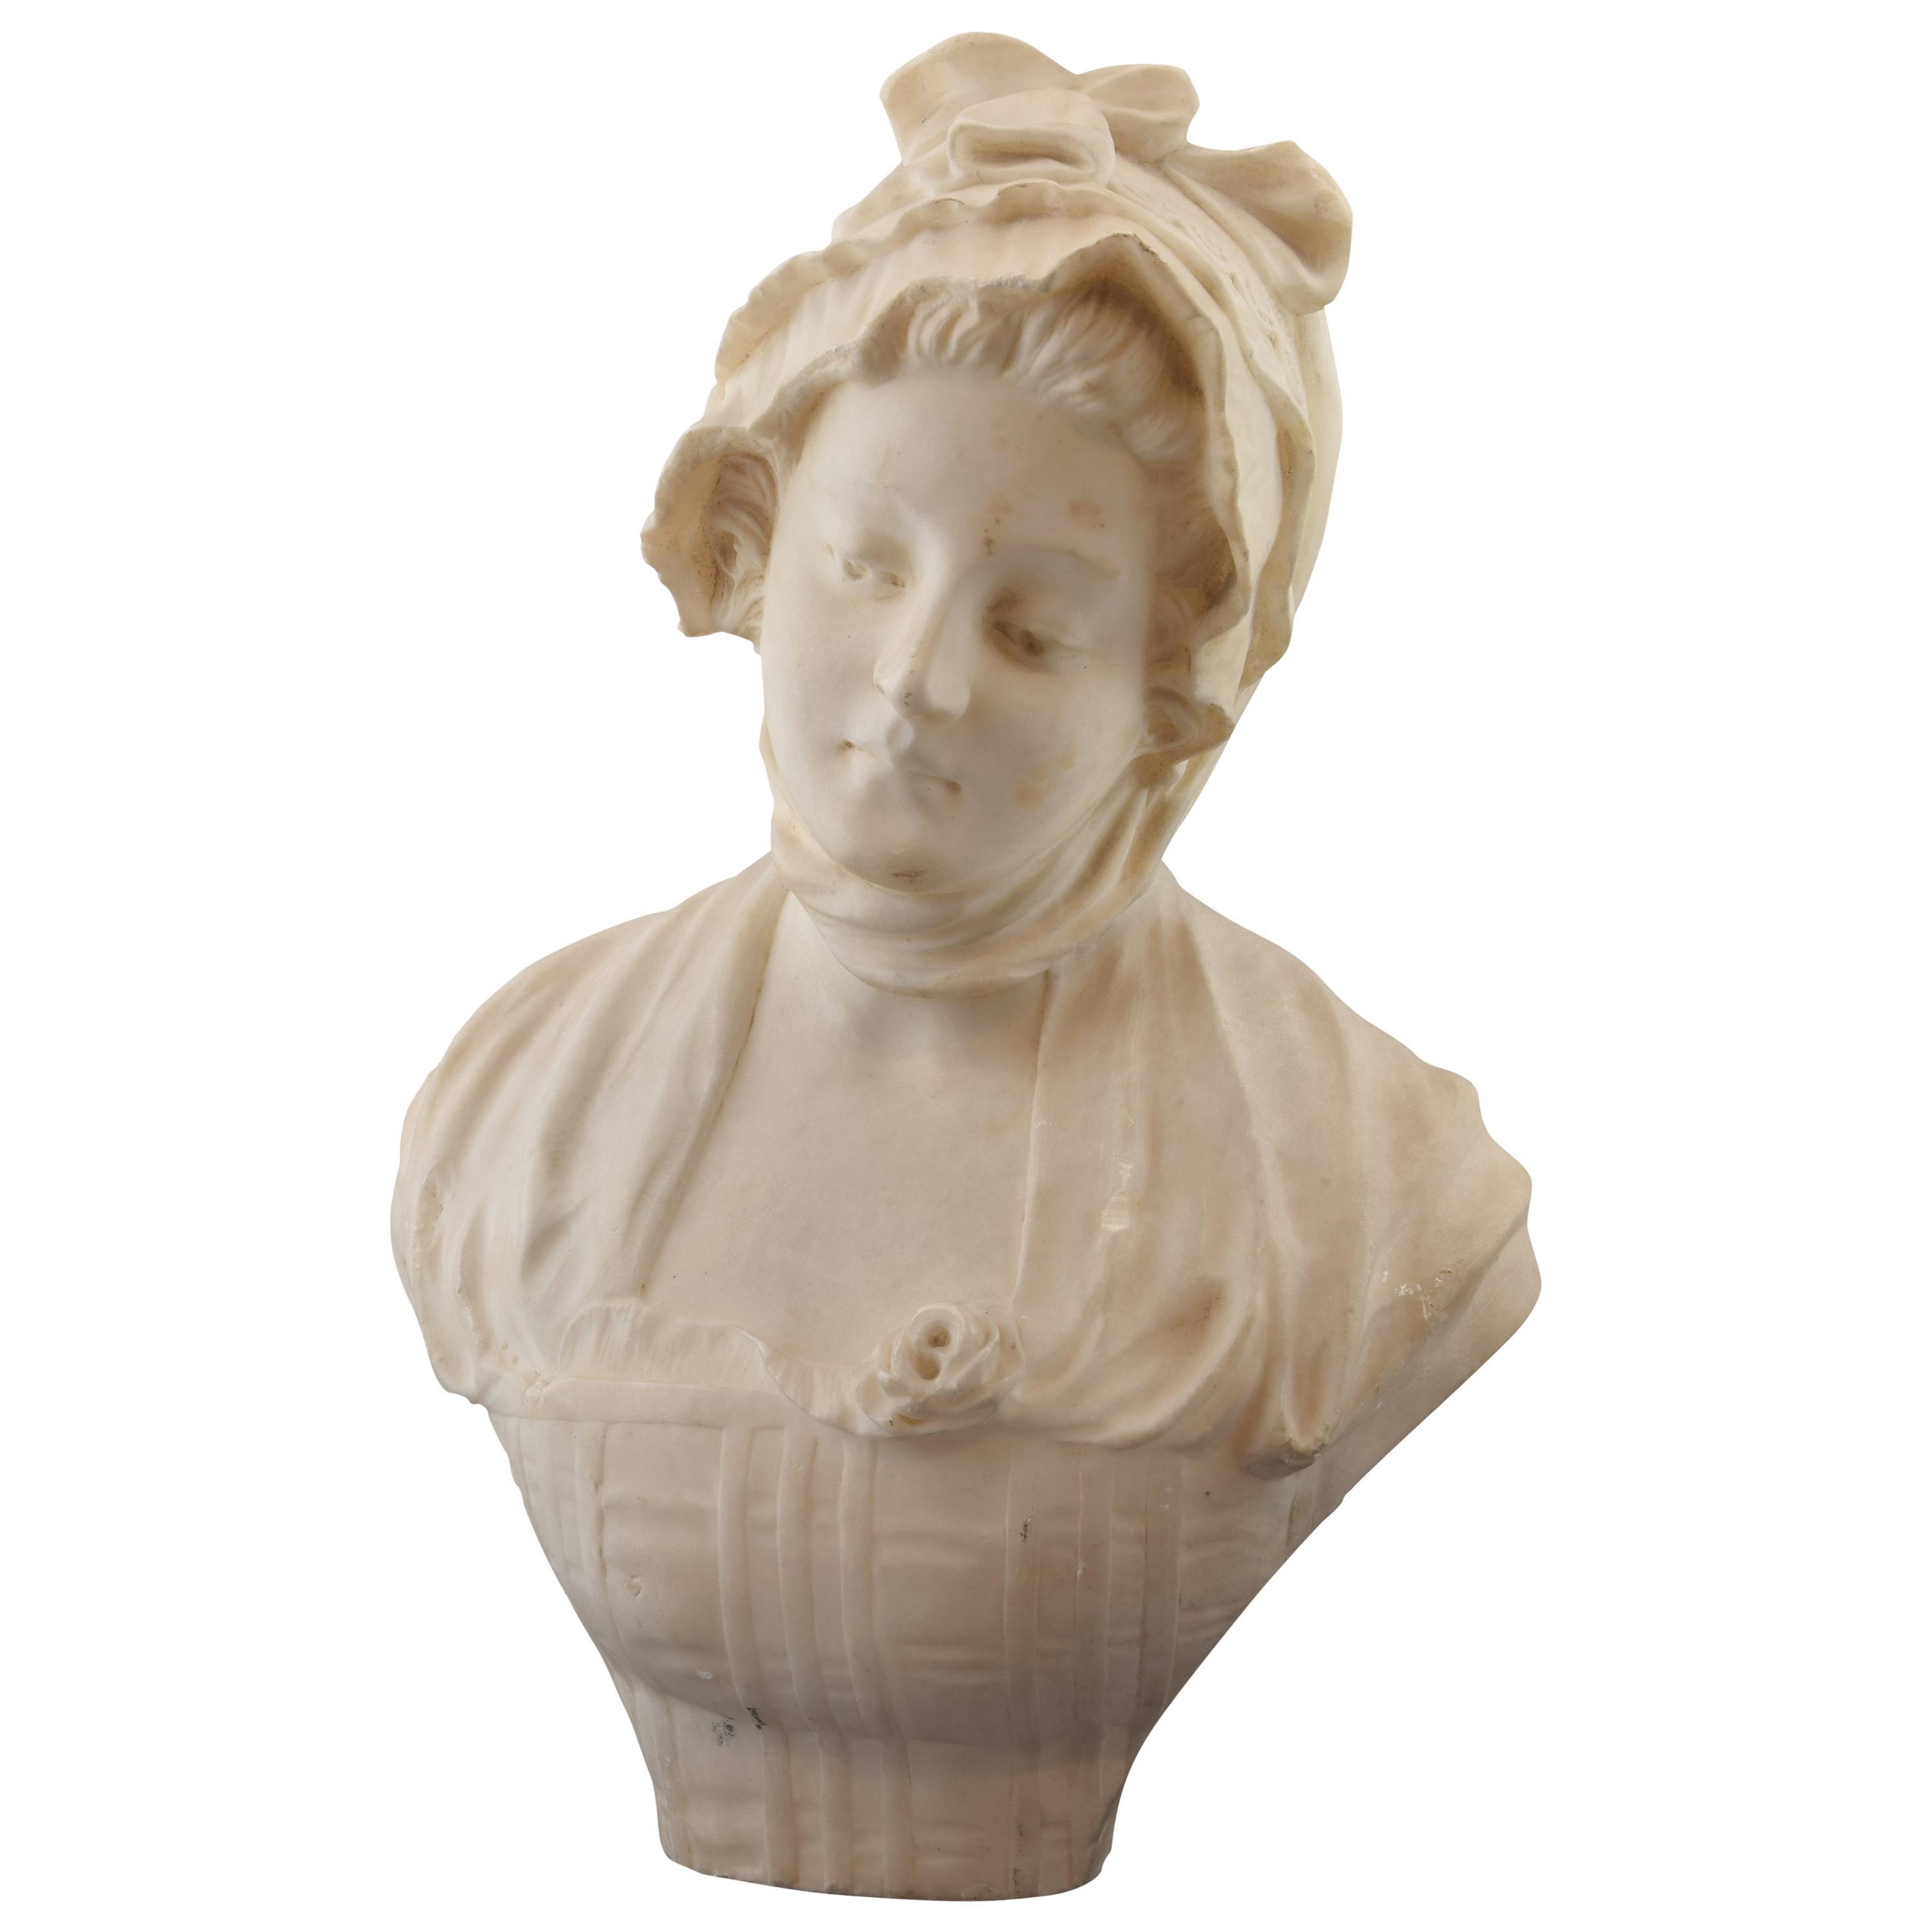 Bust of a Lady, Marble, Signed, 19th Century